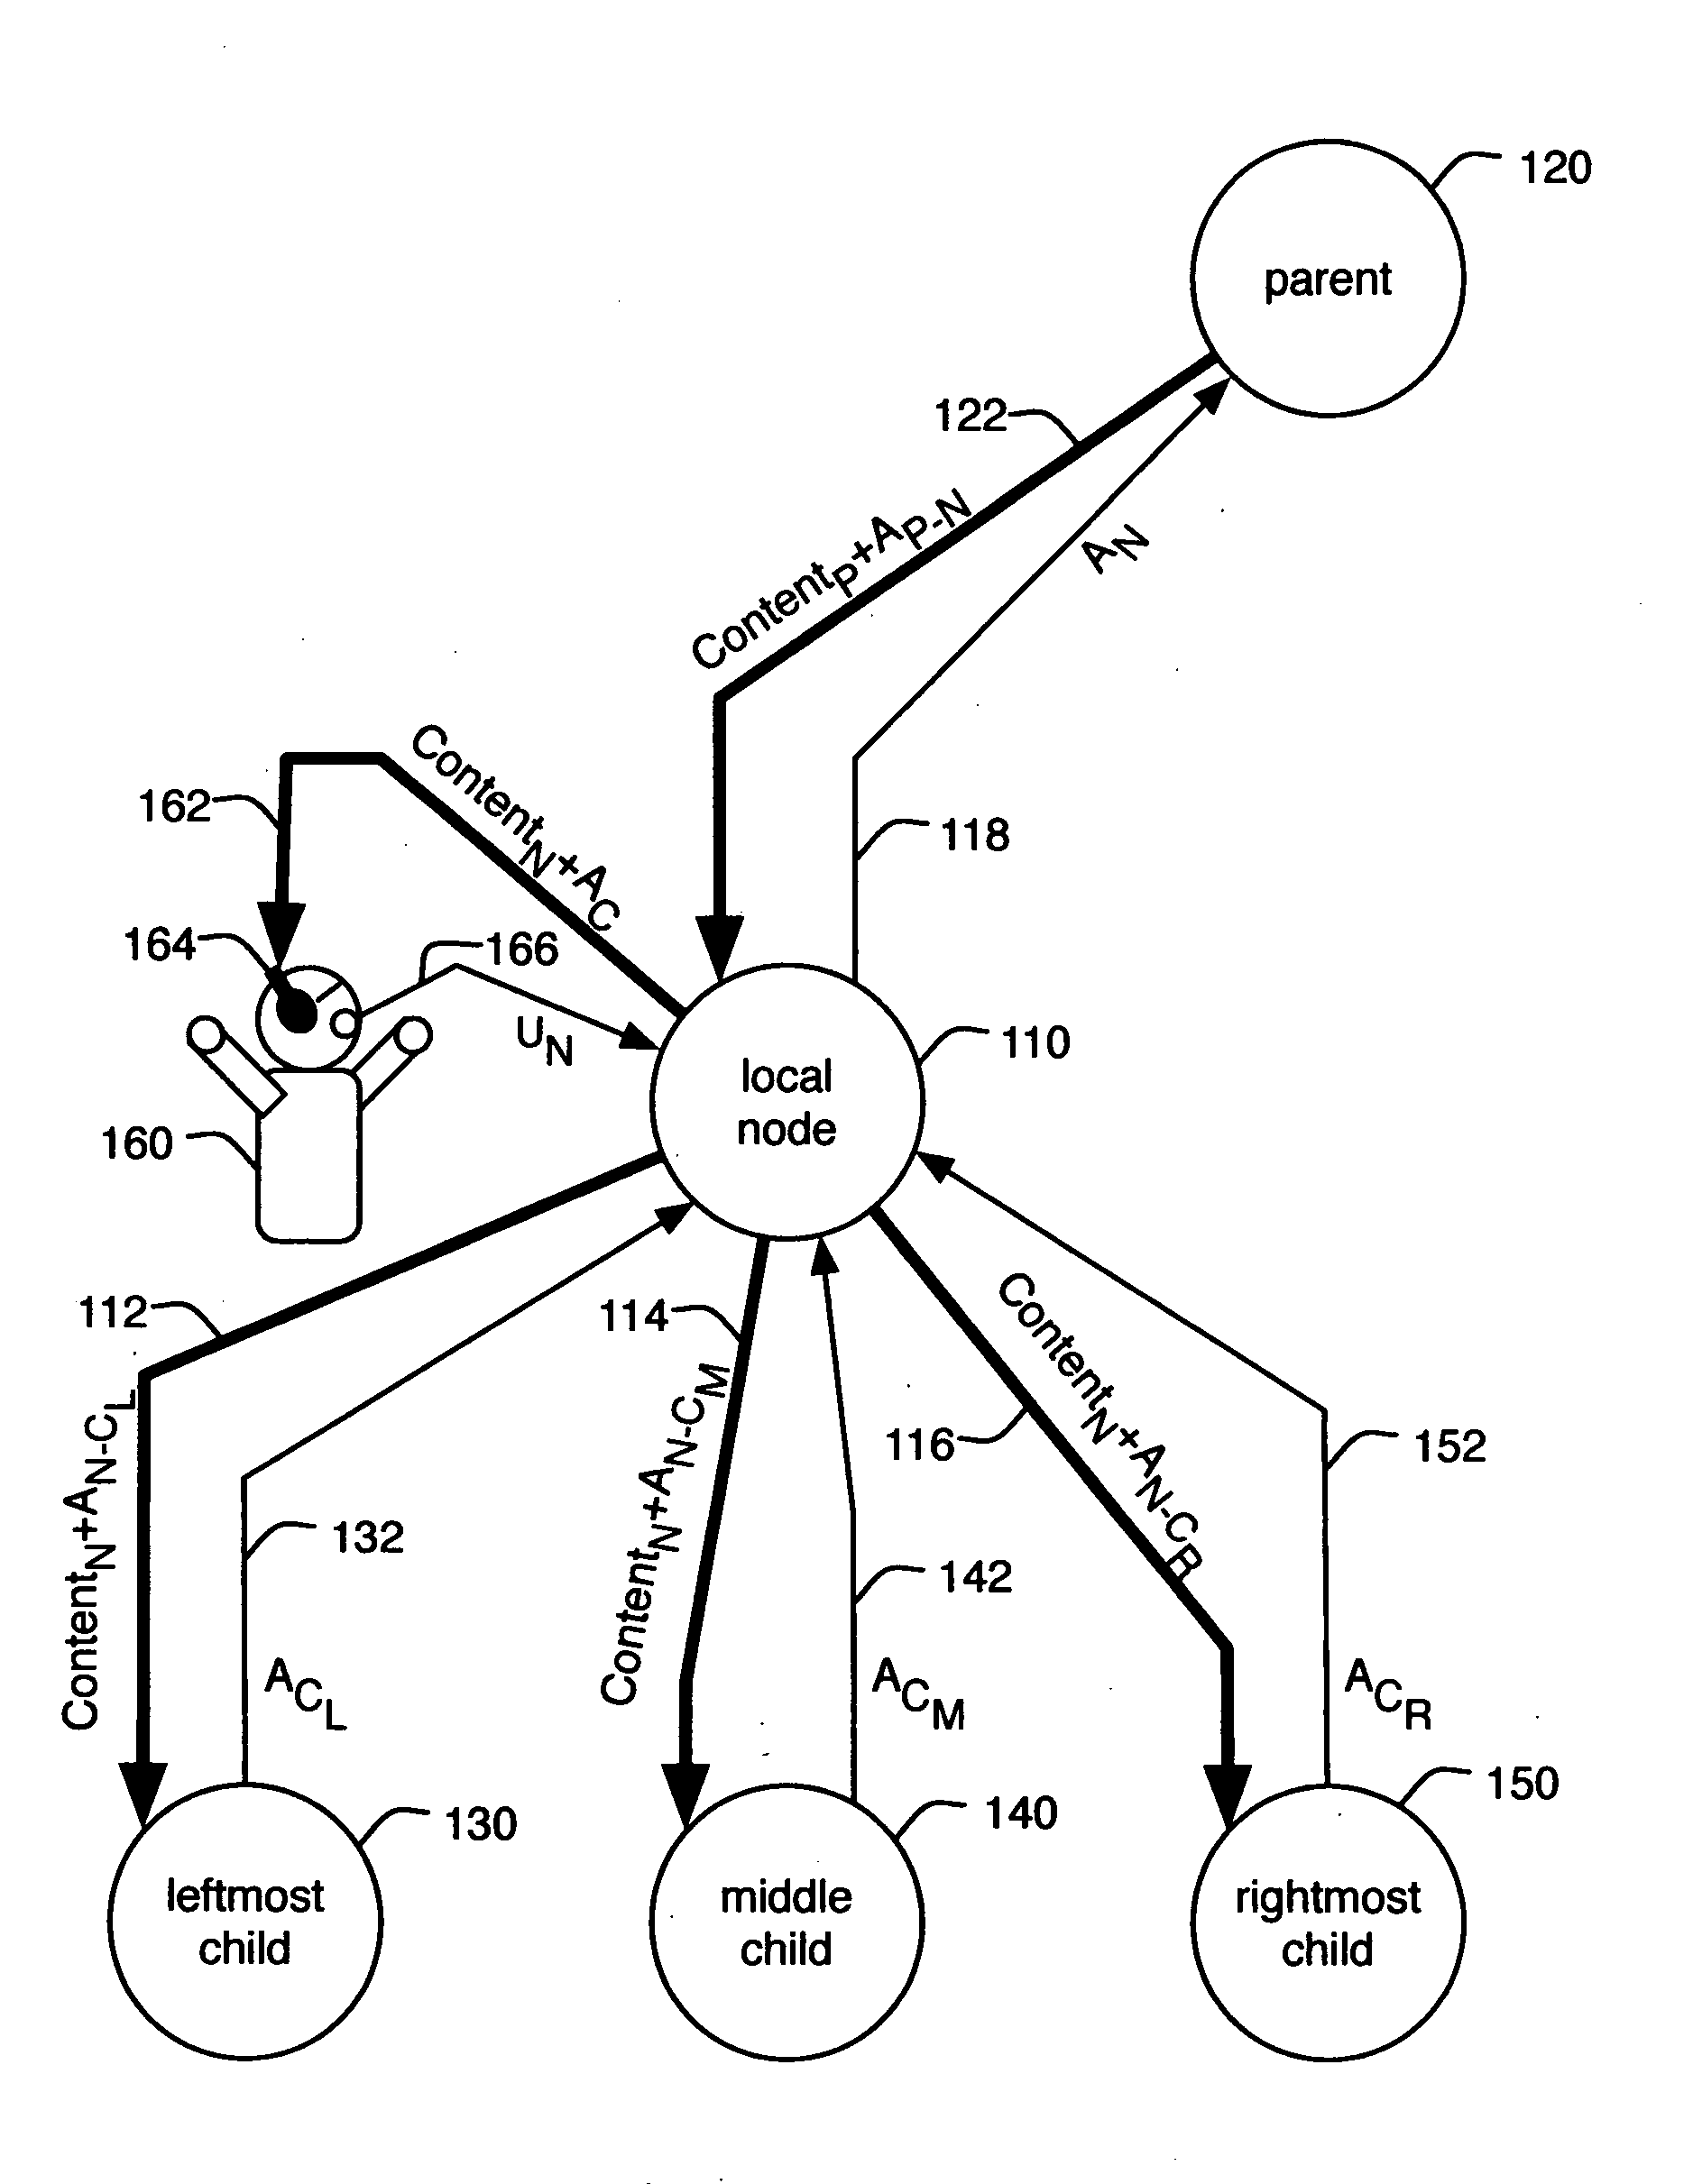 Method and apparatus for virtual auditorium usable for a conference call or remote live presentation with audience response thereto